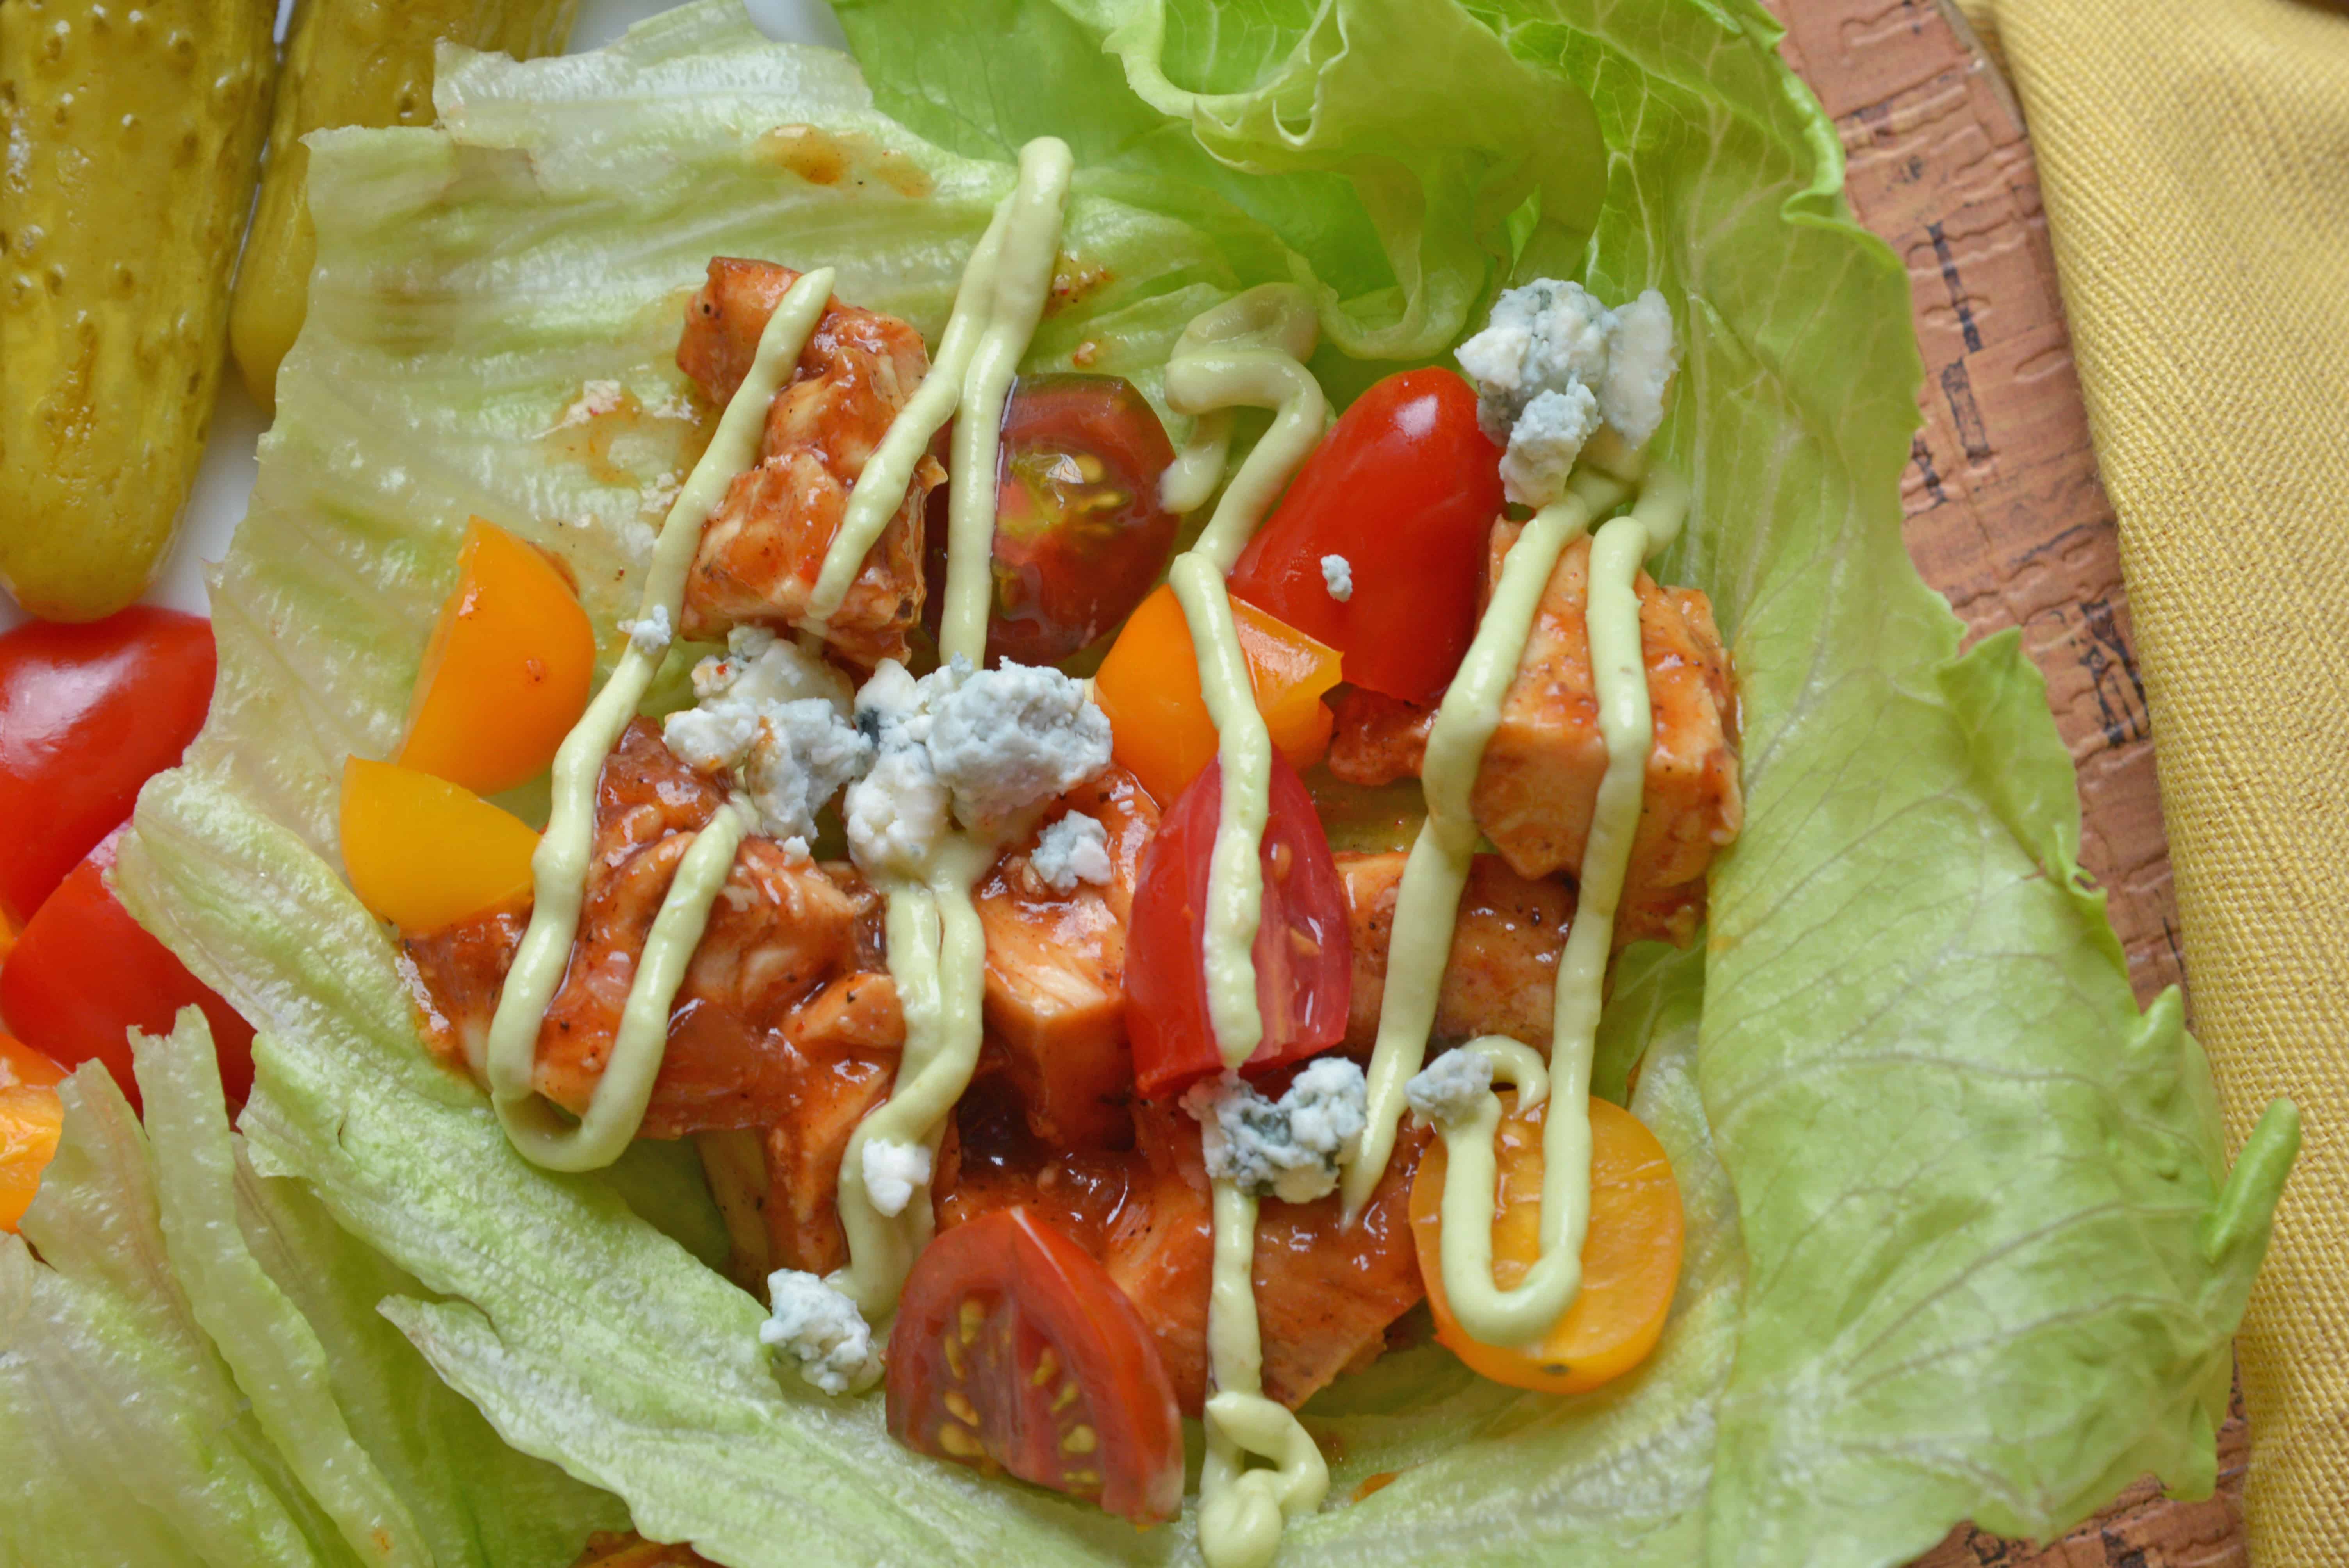 BBQ Chicken Lettuce Wraps use seasoned chicken with your favorite BBQ sauce and wrap them in crispy lettuce with juicy tomatoes, blue cheese and cool avocado dressing. #lettucewraps www.savoryexperiments.com 